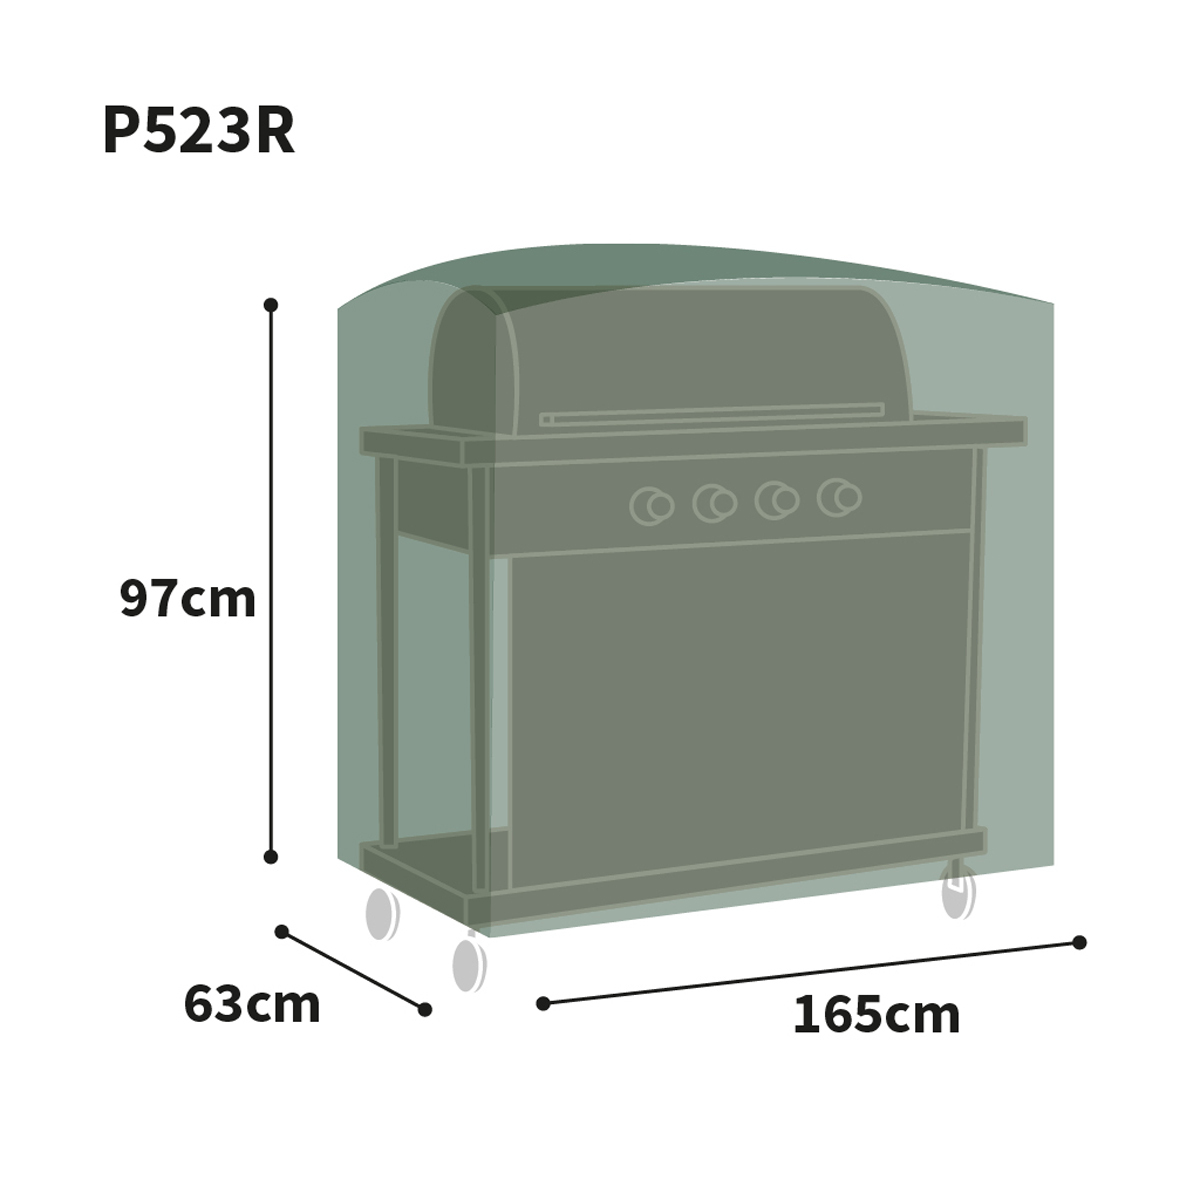 Bosmere Protector Kitchen Barbecue Cover Graphic Size Guide